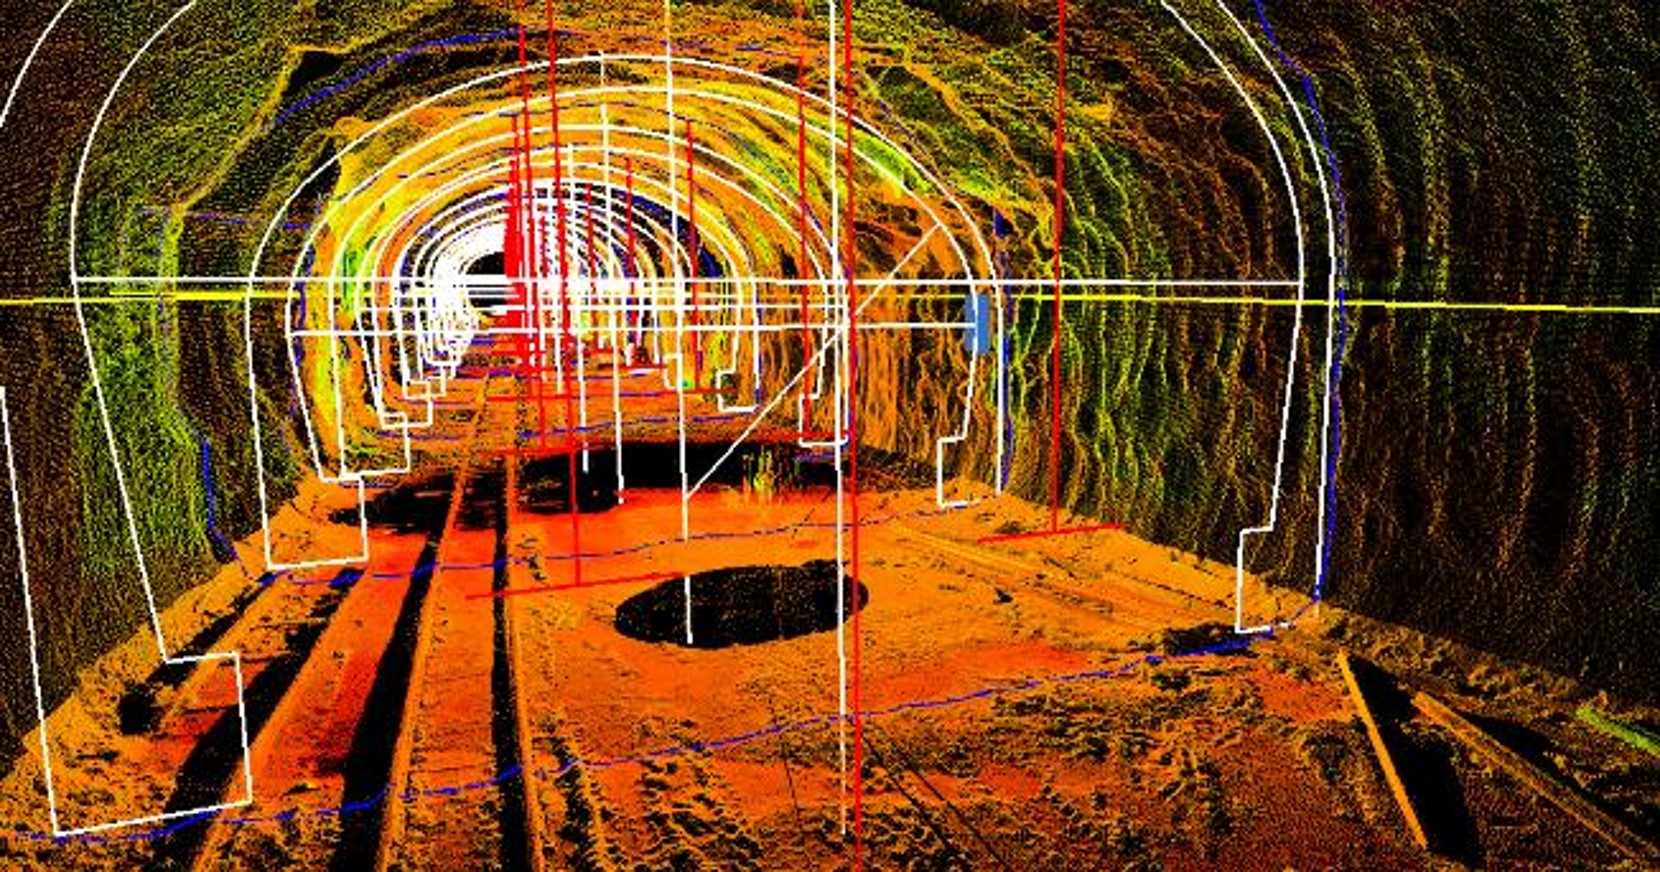 3D scan of a rail tunnel from surveying railroads